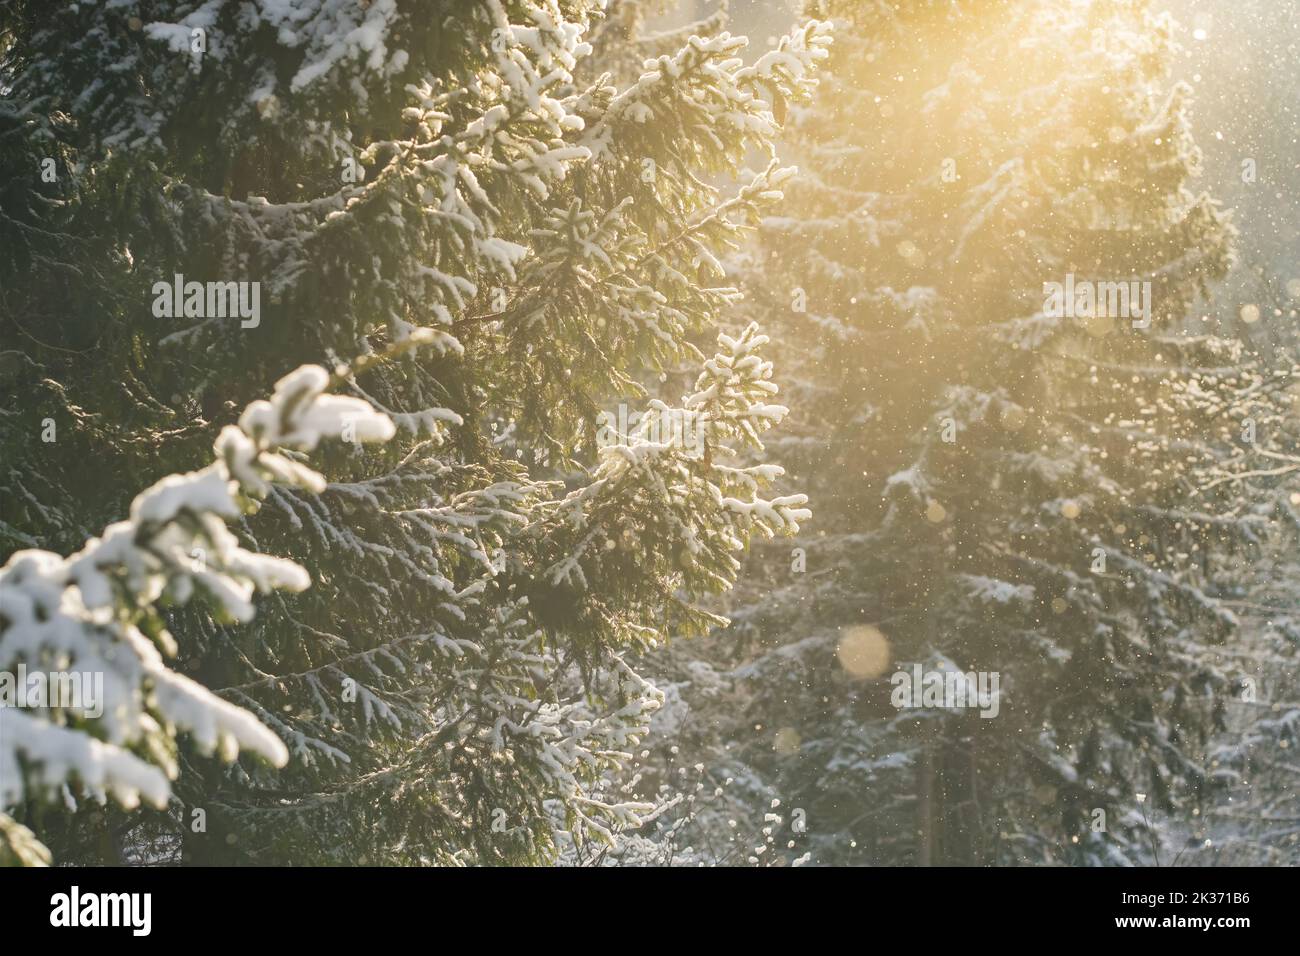 Beautiful winter scenery with snow falling in spruce forest Stock Photo